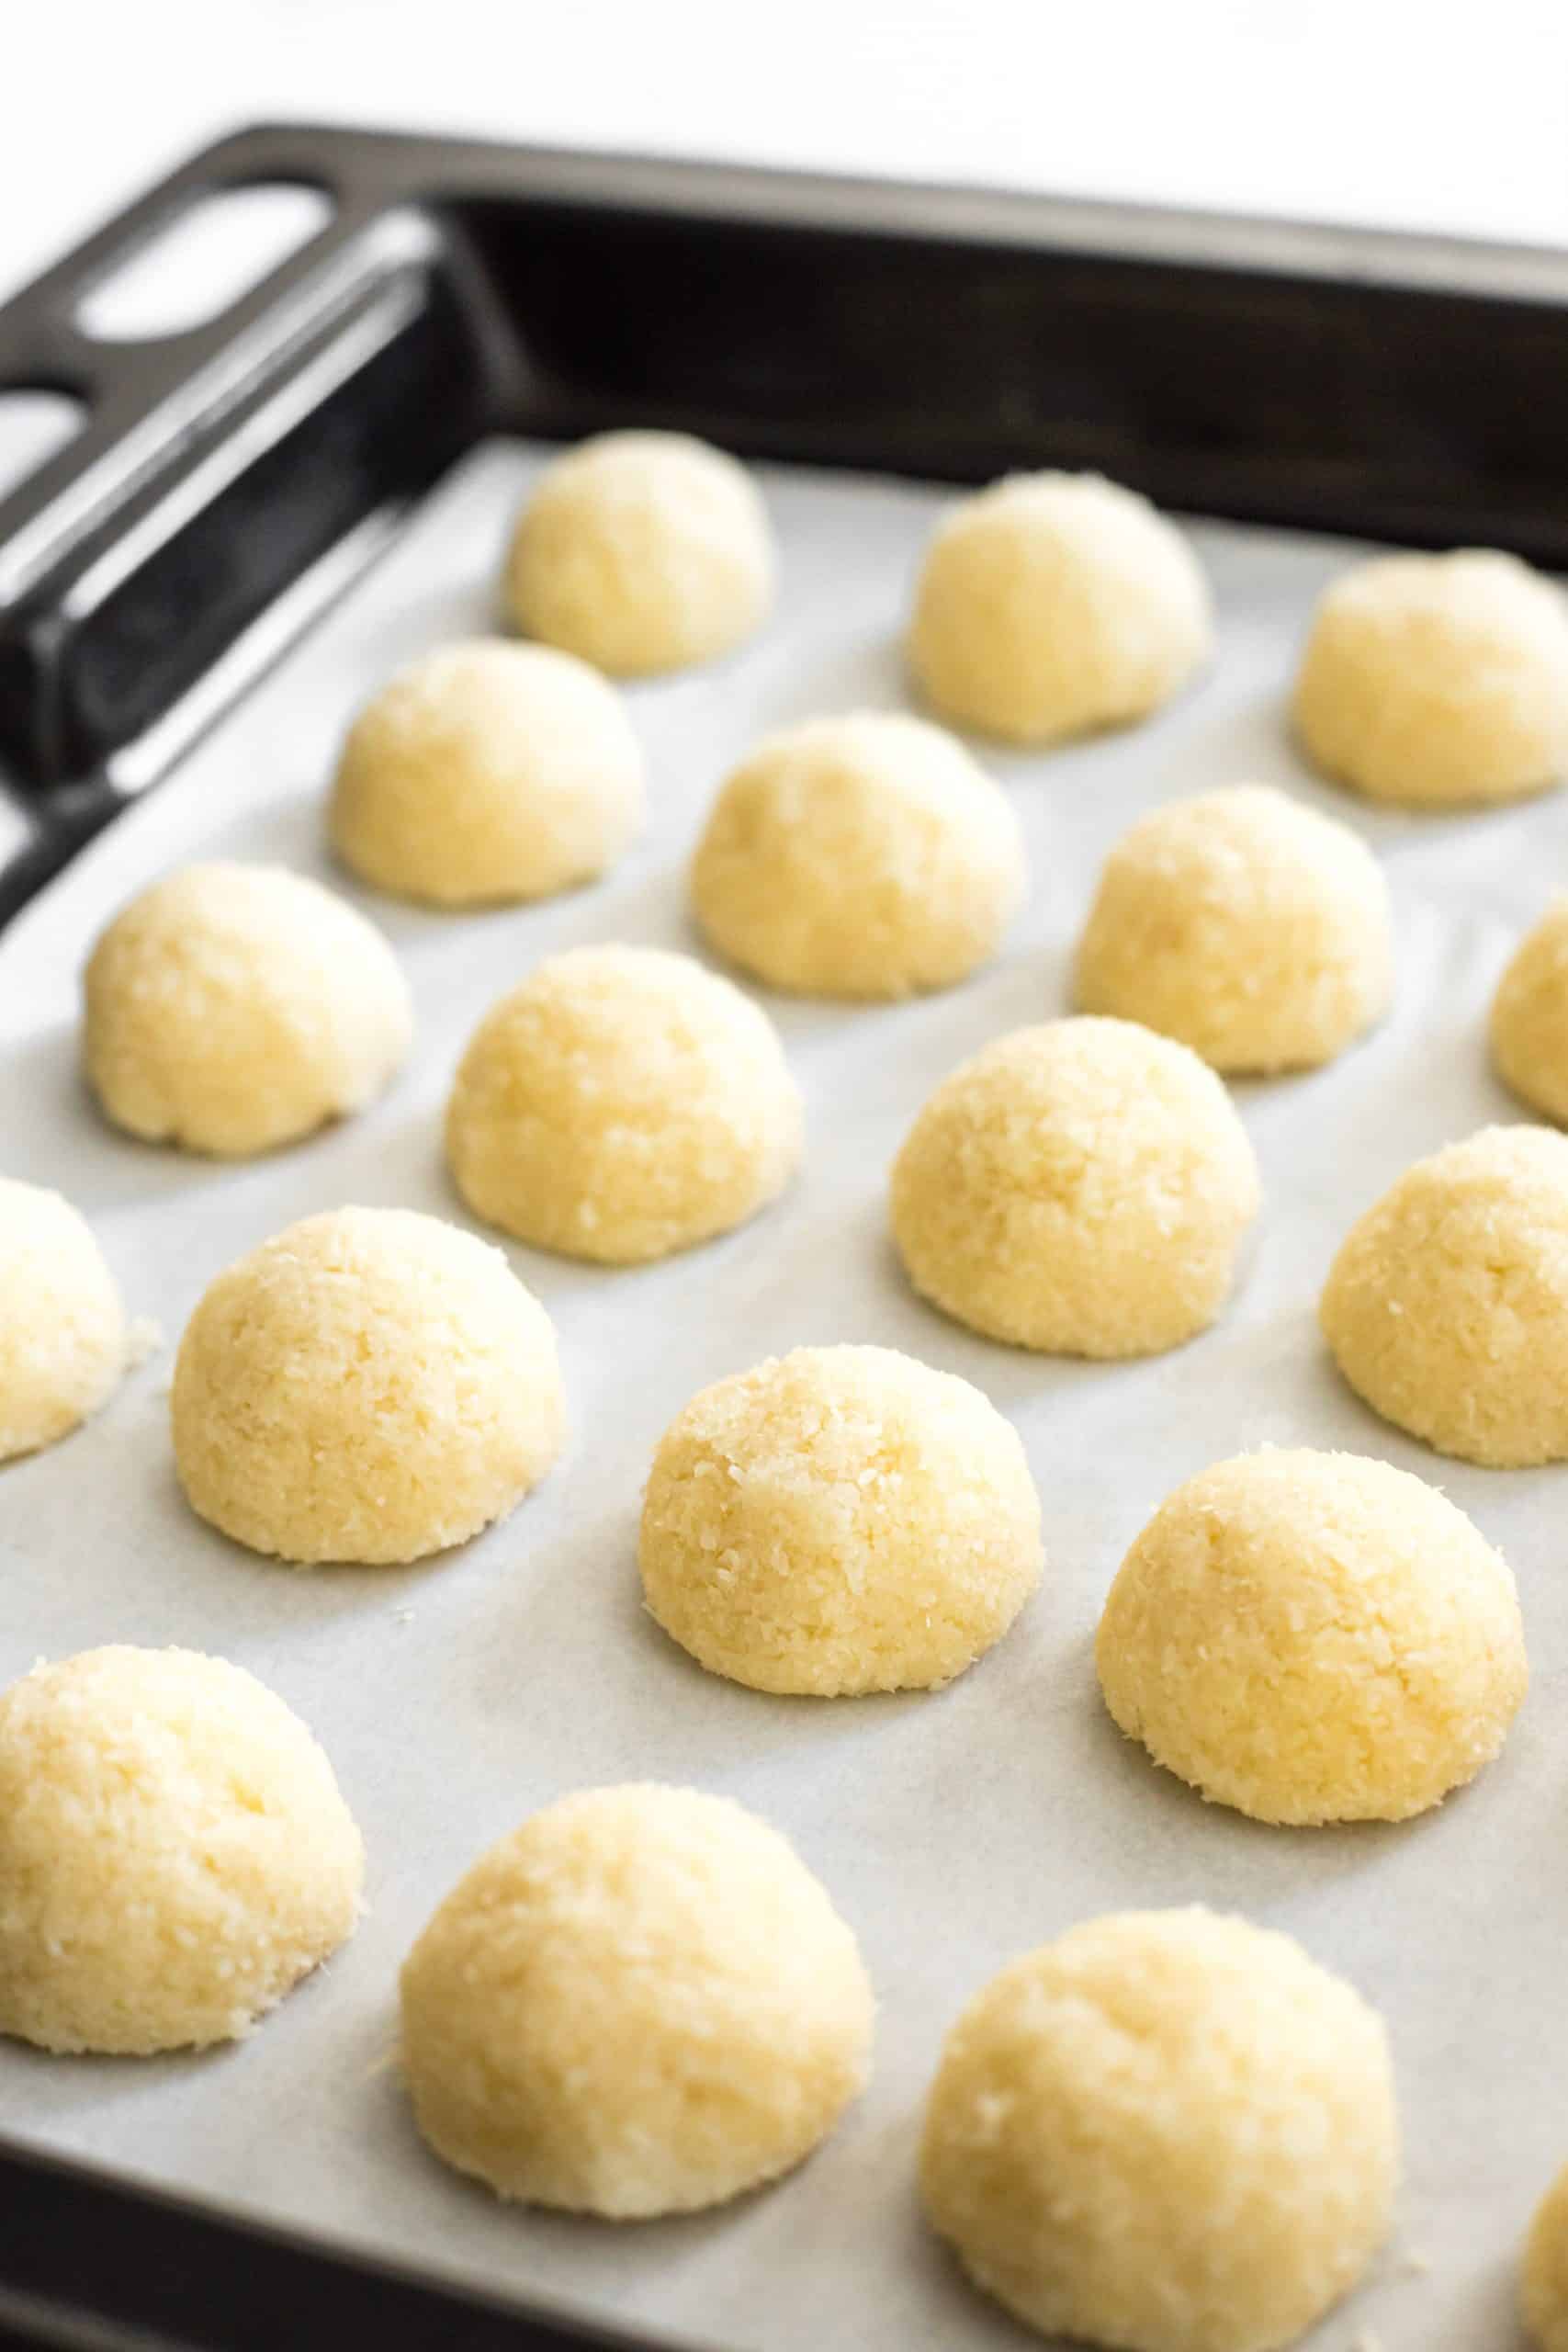 Rows of dome-shaped cookie dough balls on parchment-lined baking sheet.